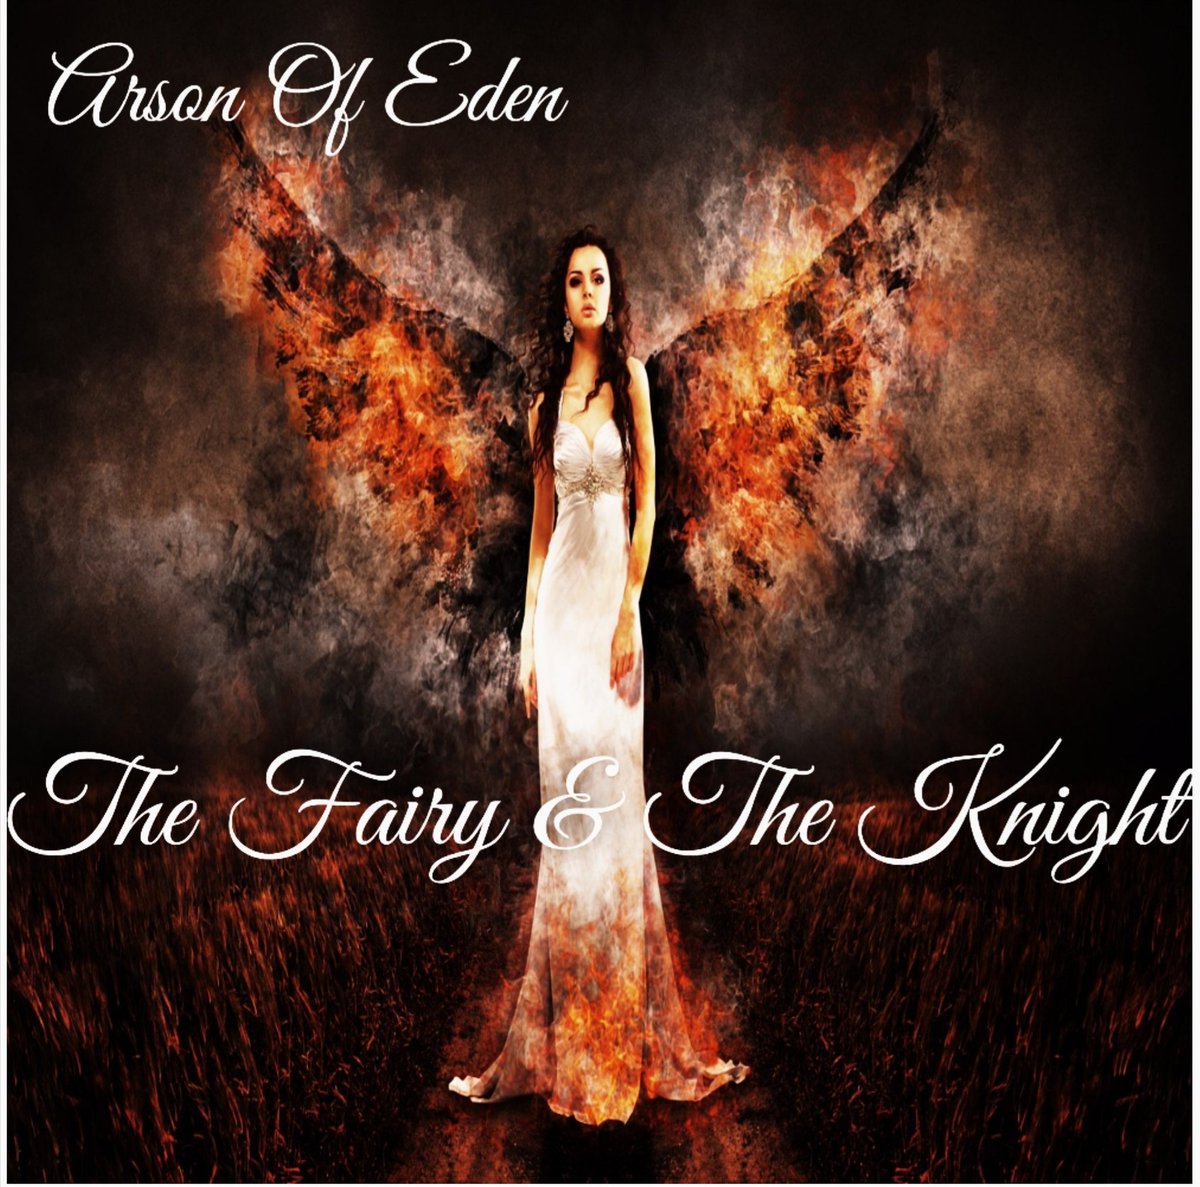 Arson Of Eden 🔥
'The Fairy & The Knight'
Coming Soon 🔥🔥🔥 #MetalRap #Triphop #EmoRock